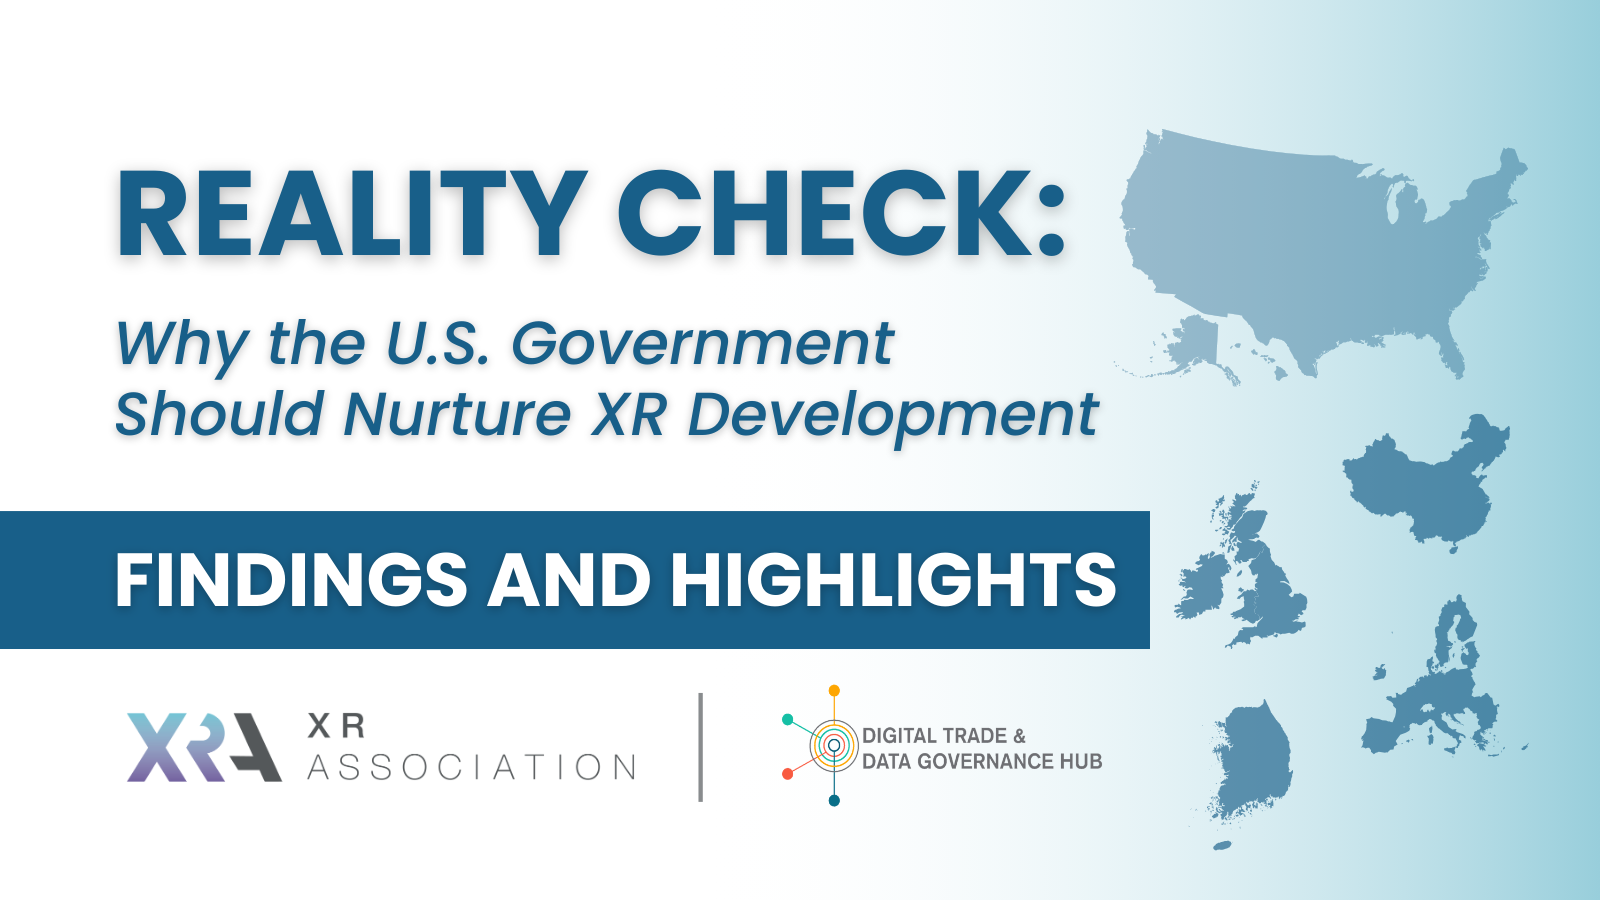 XRA RELEASED KEY FINDINGS AND HIGHLIGHTS FROM UPCOMING WHITE PAPER ON U.S. COMPETITIVENESS IN XR